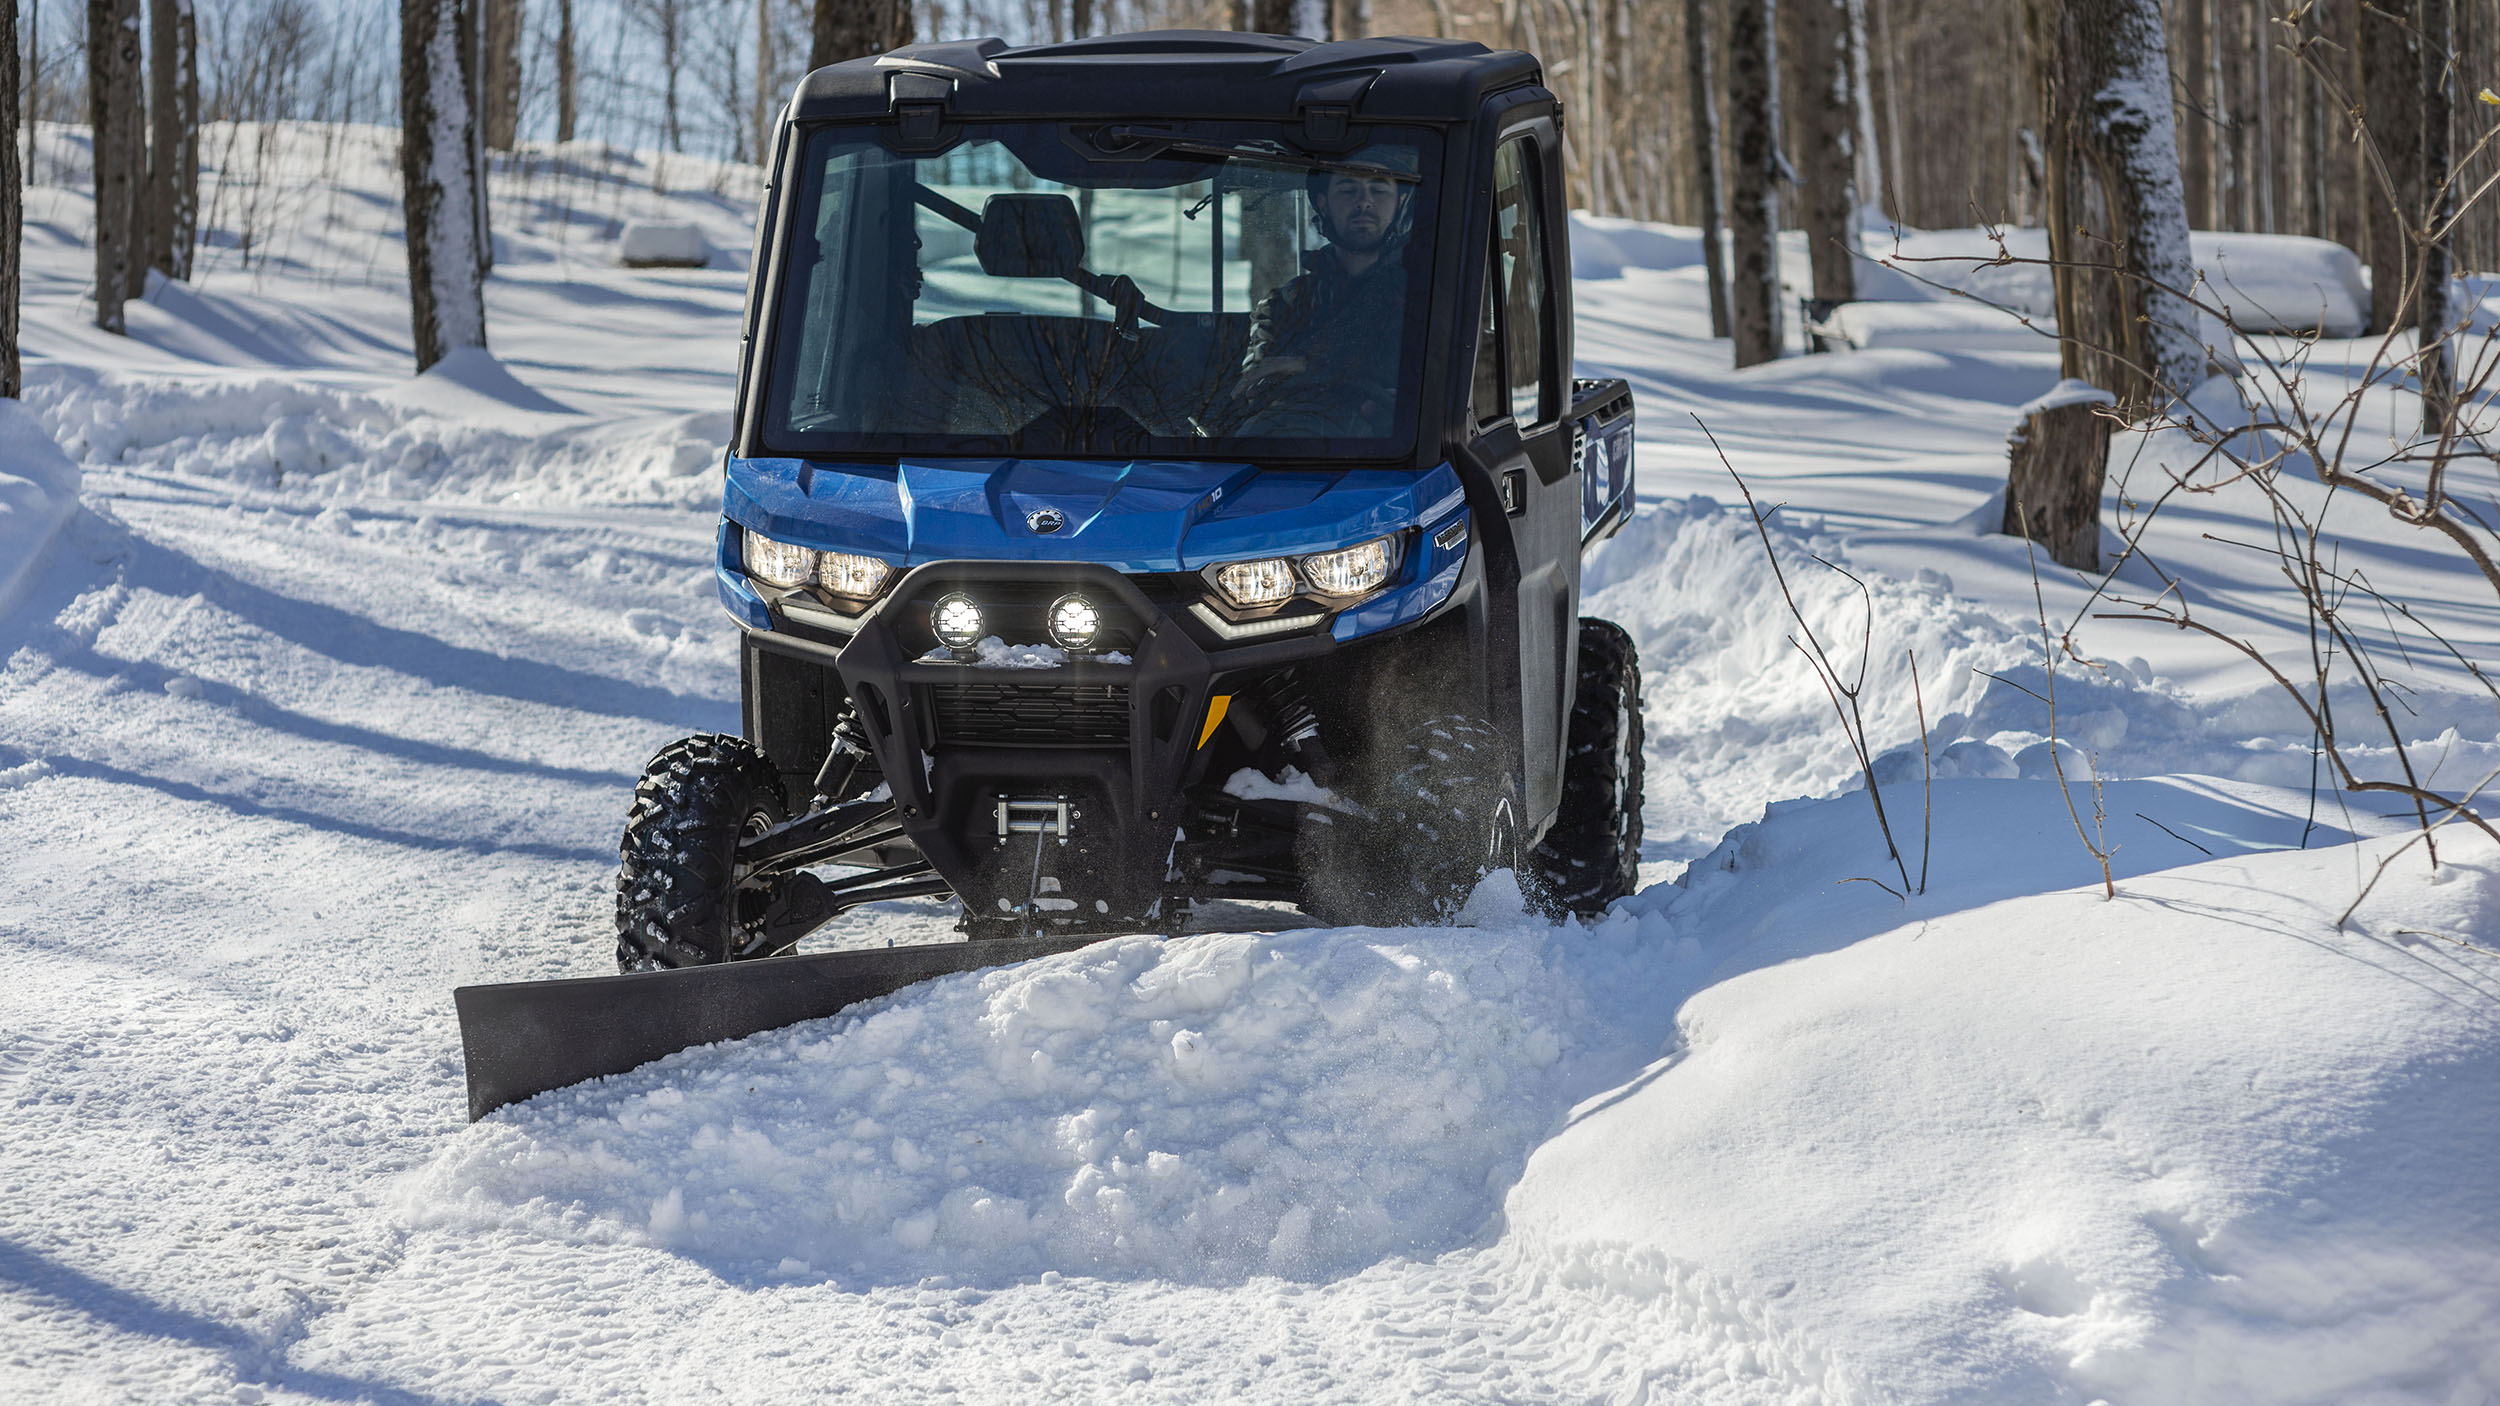 A Can-Am Defender plowing snow